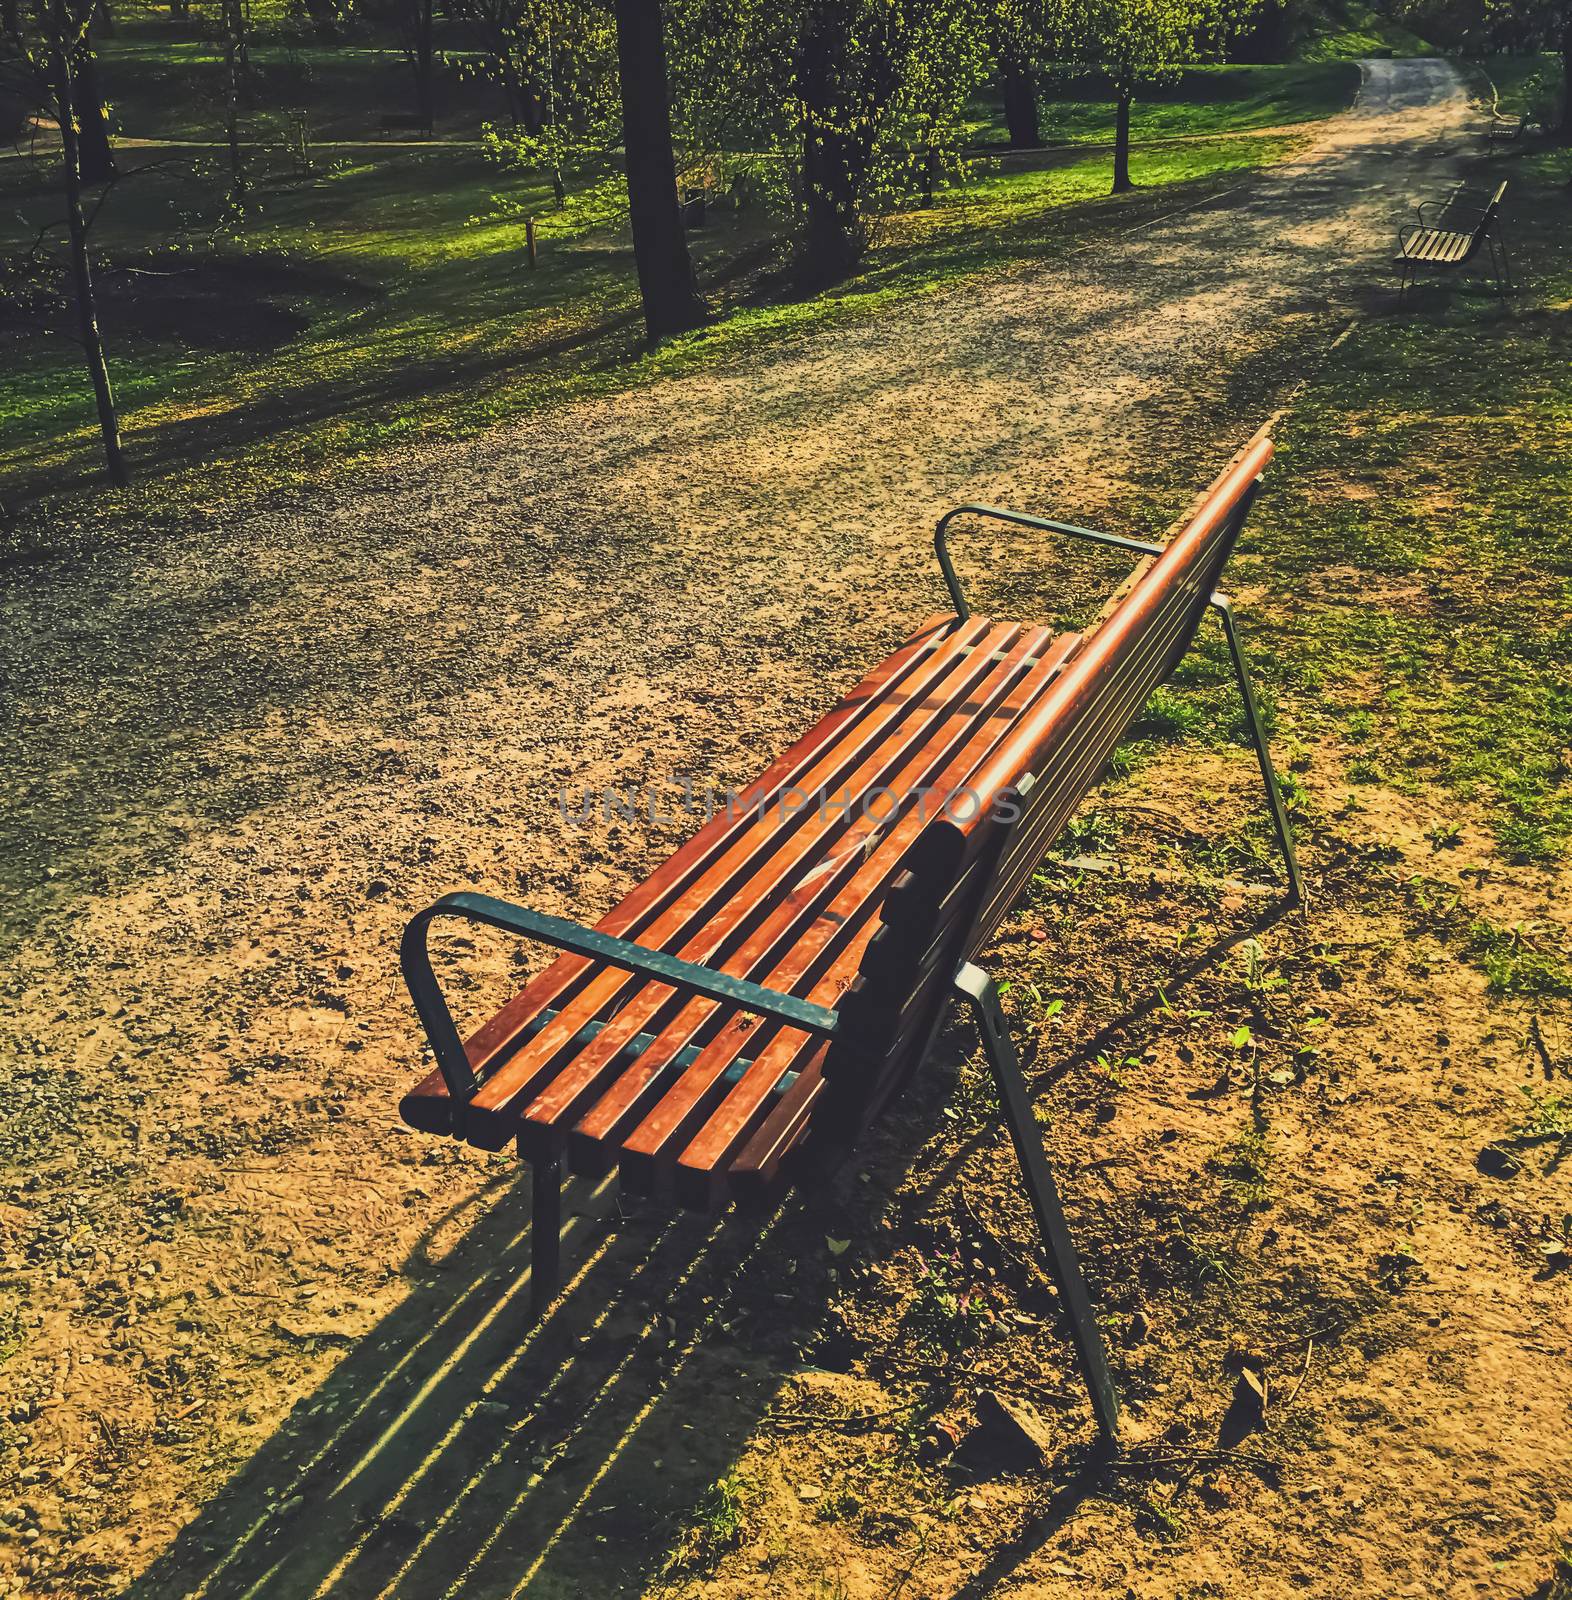 Empty bench in park during a city lockdown in coronavirus pandemic by Anneleven